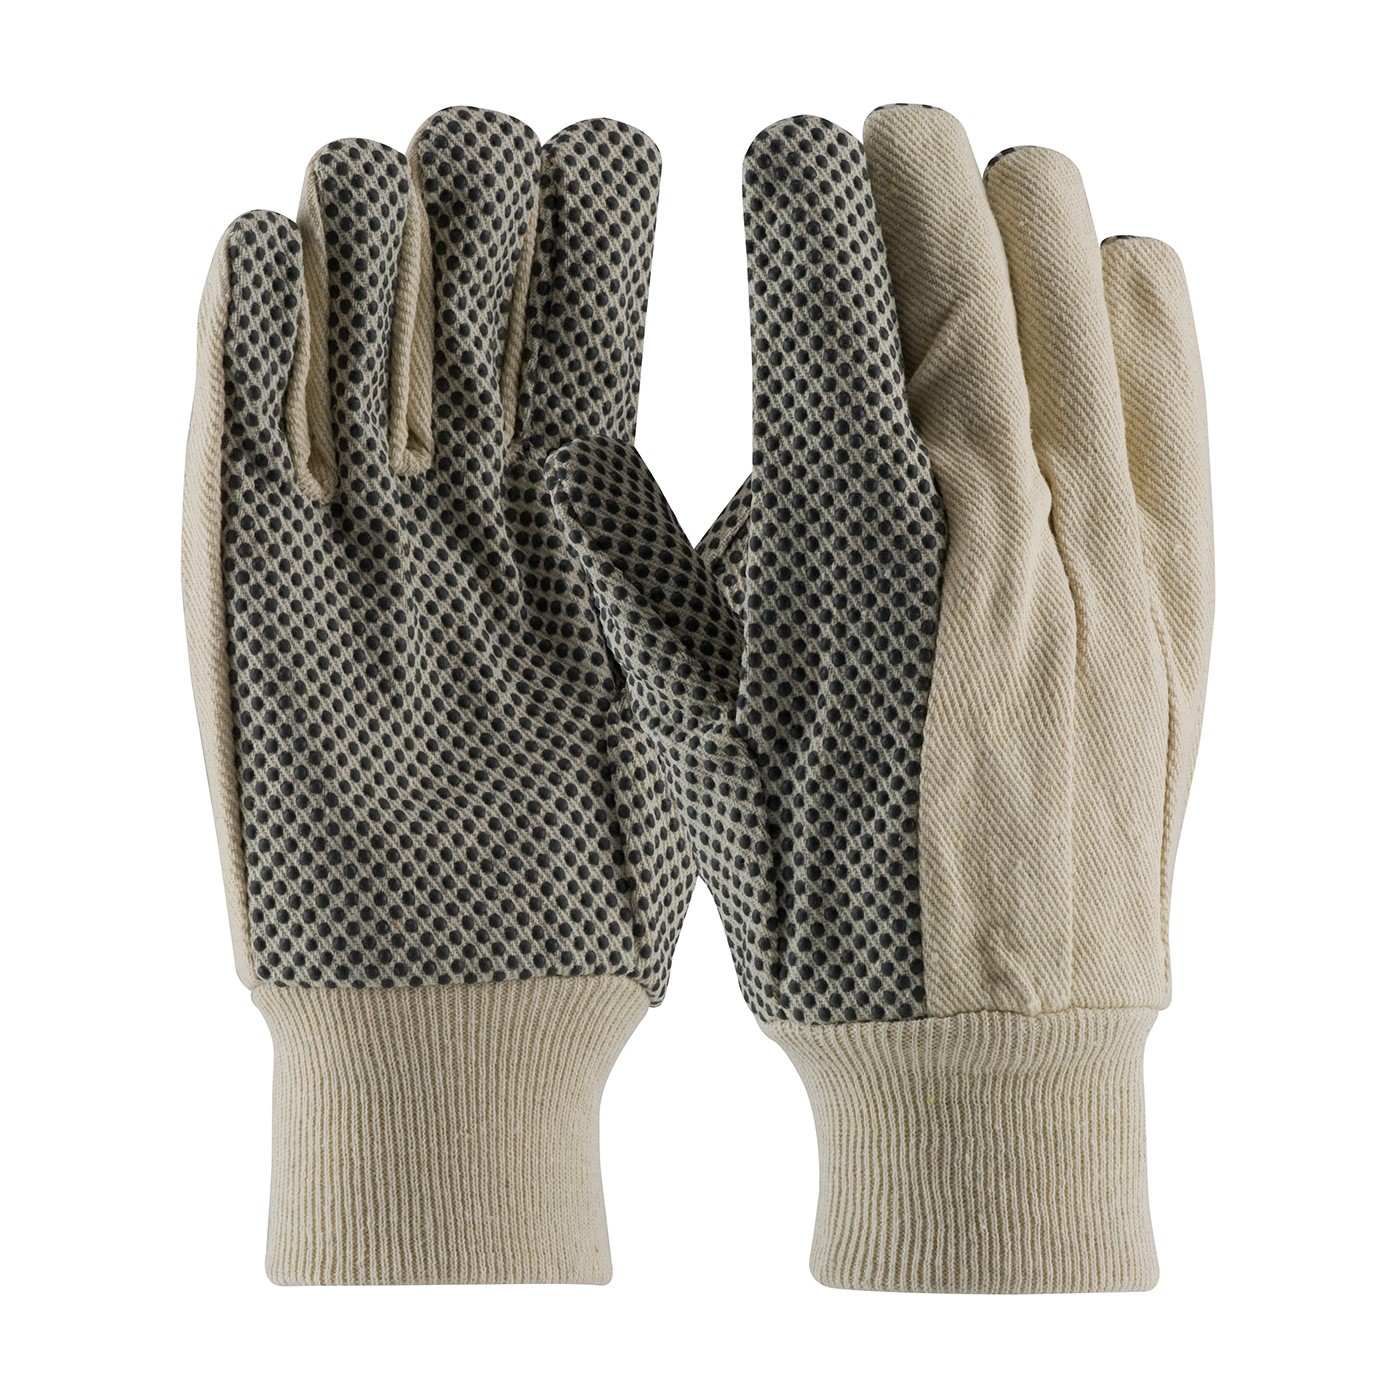 PIP® Premium Grade Cotton Canvas Glove with PVC Dot Grip on Palm, Thumb and Forefinger - 8 oz  (#91-908PD)